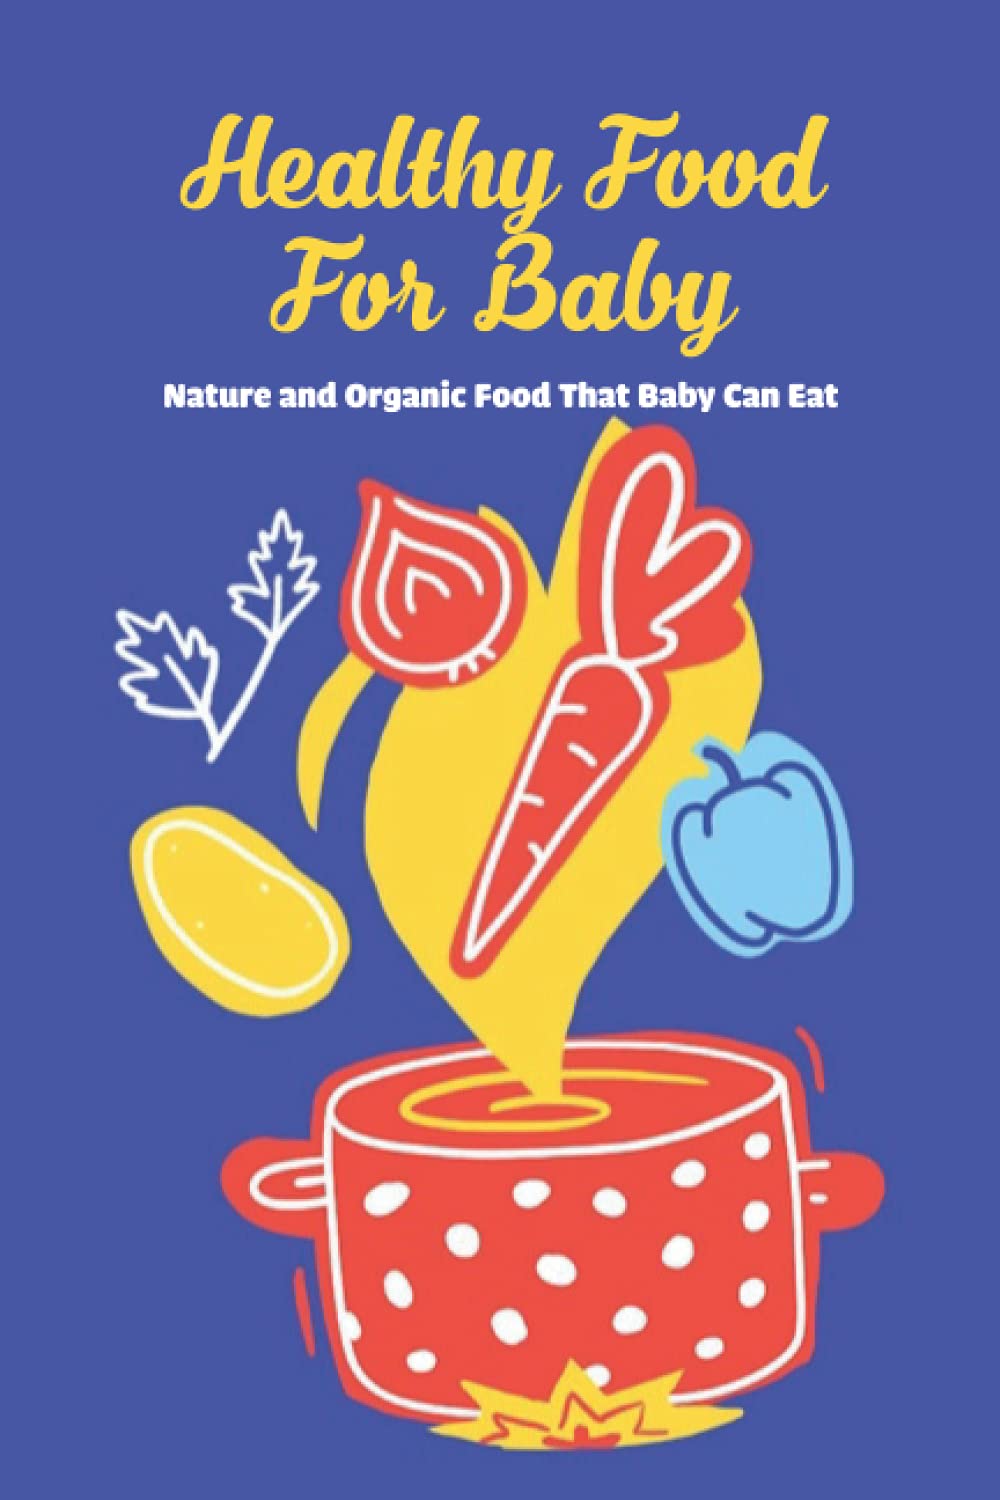 Healthy Food for Baby: Nature and Organic Food That Baby Can Eat: Nutritious Food Recipes for Babies